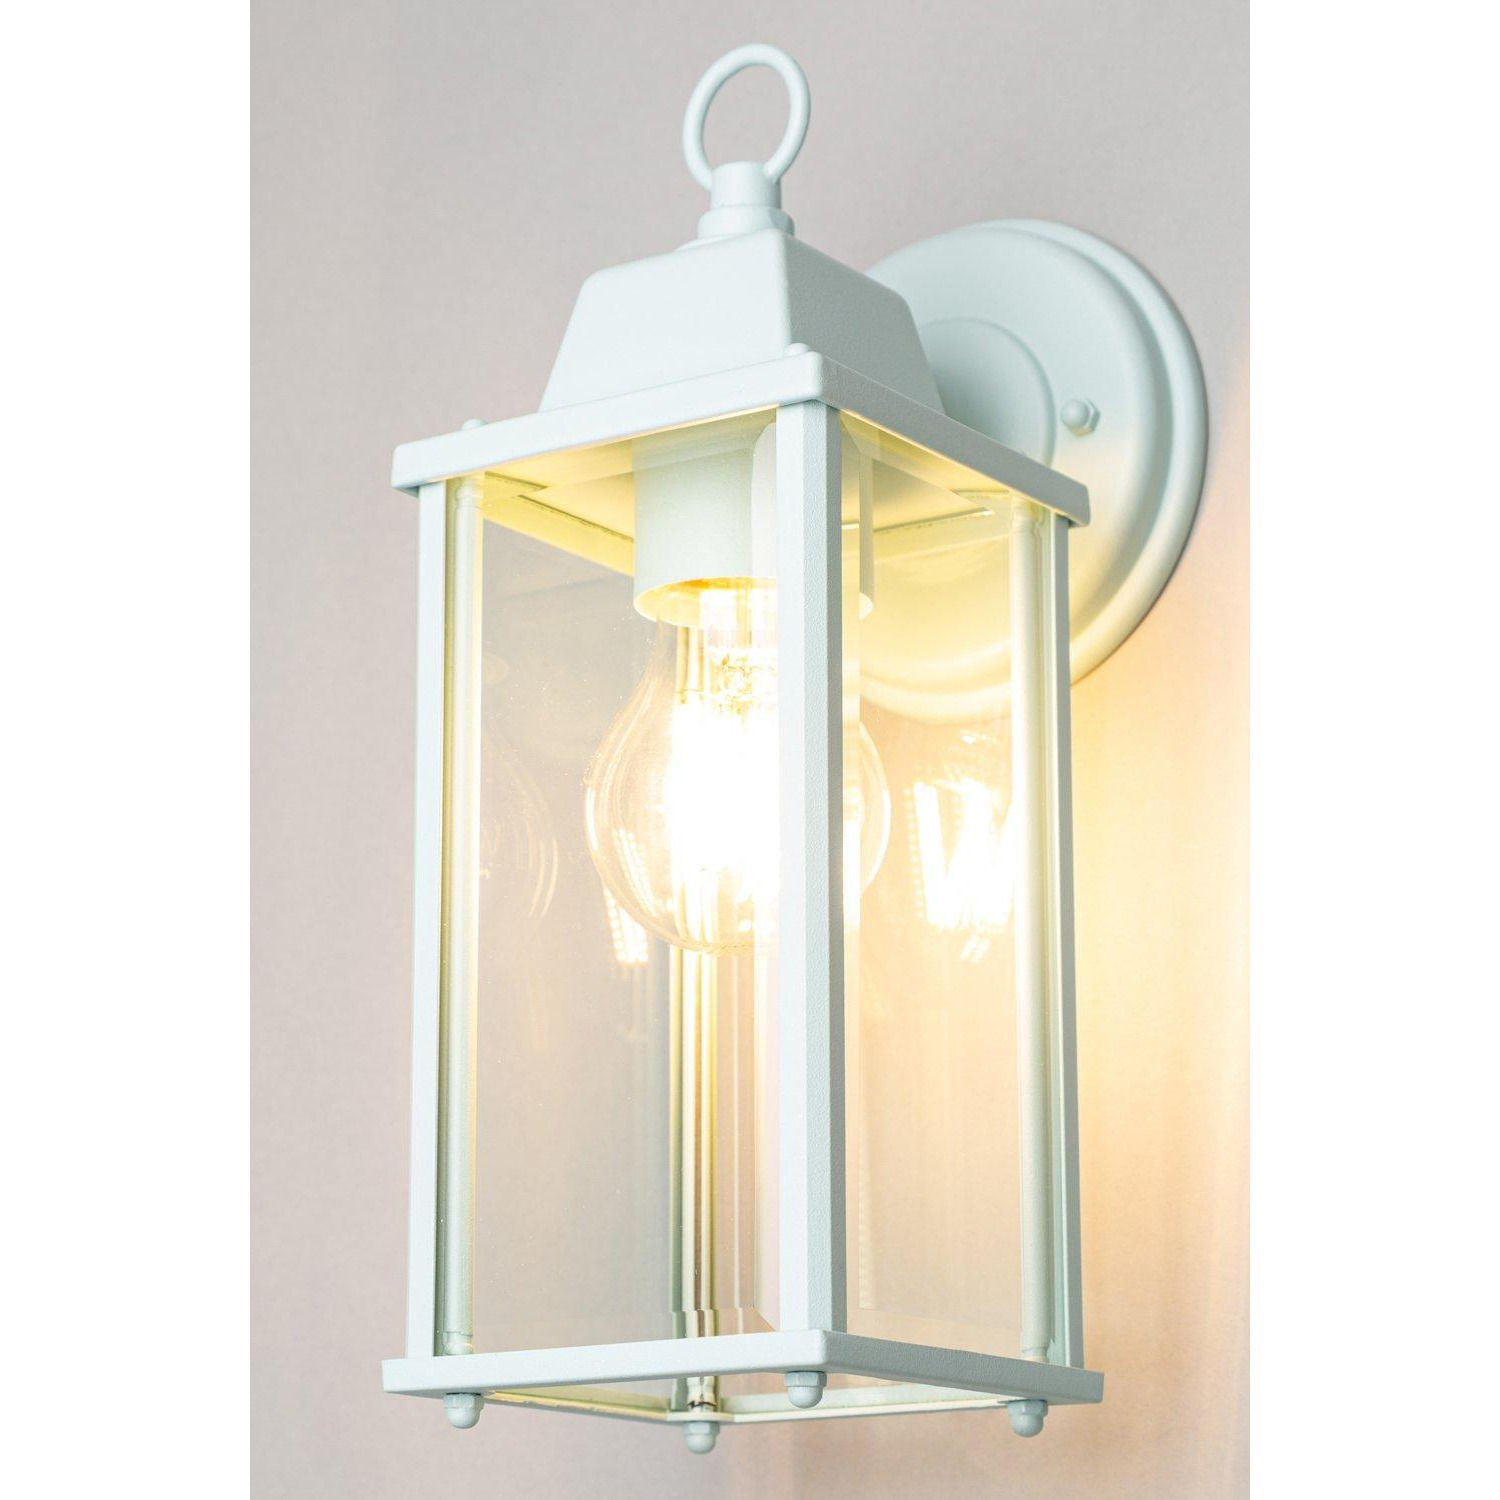 Lille Outdoor Wall Light - image 1